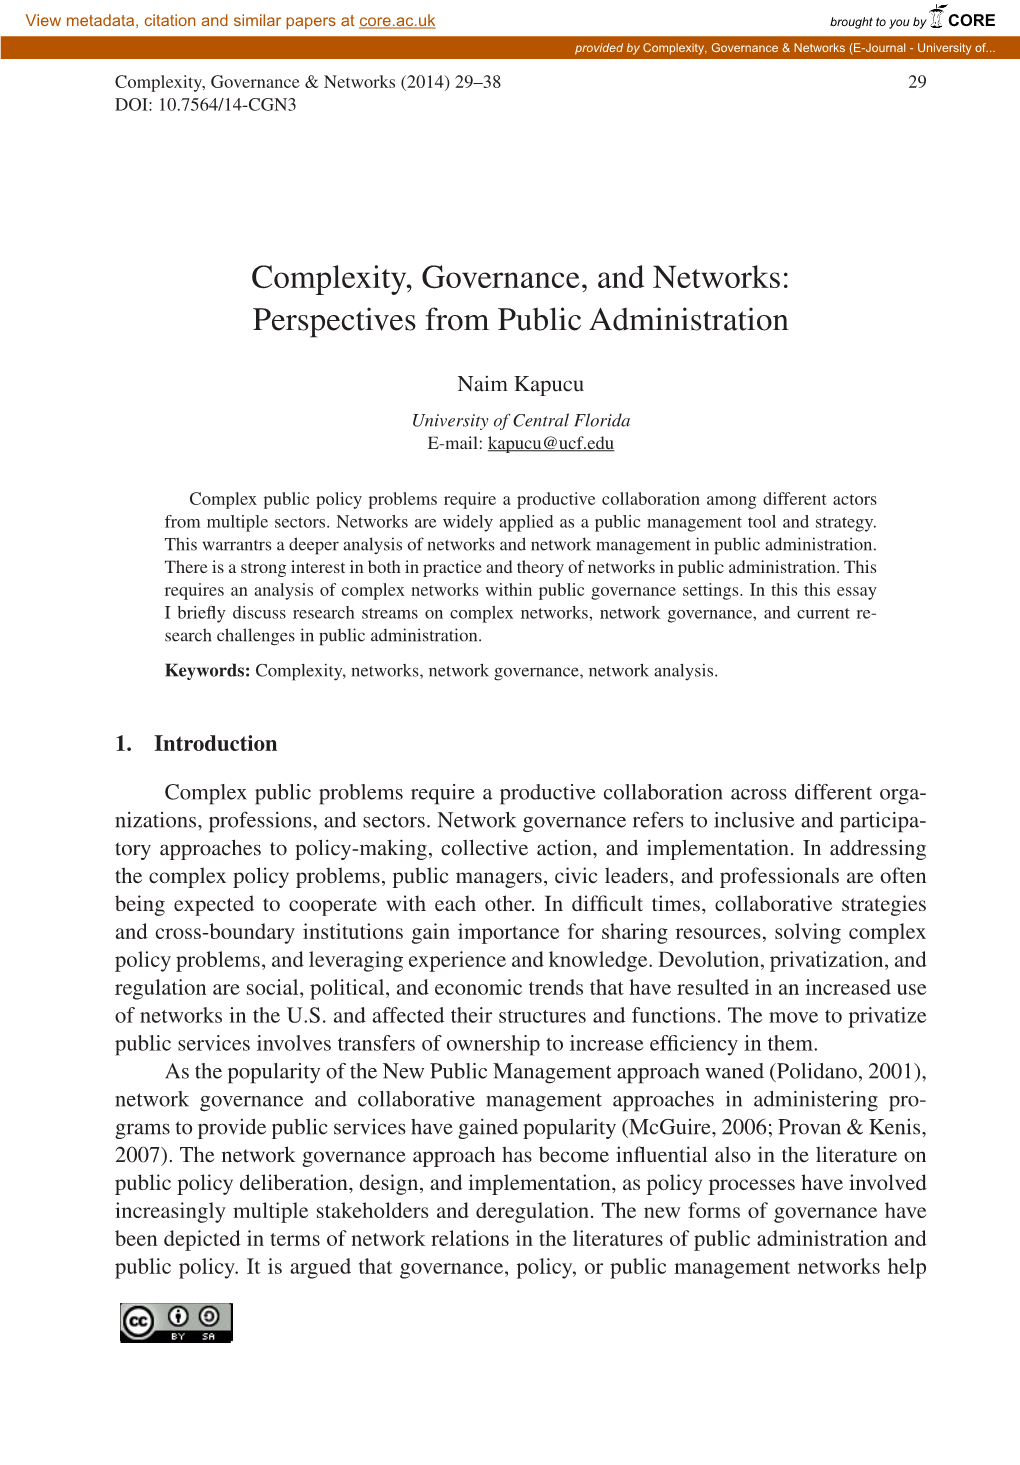 Complexity, Governance, and Networks: Perspectives from Public Administration